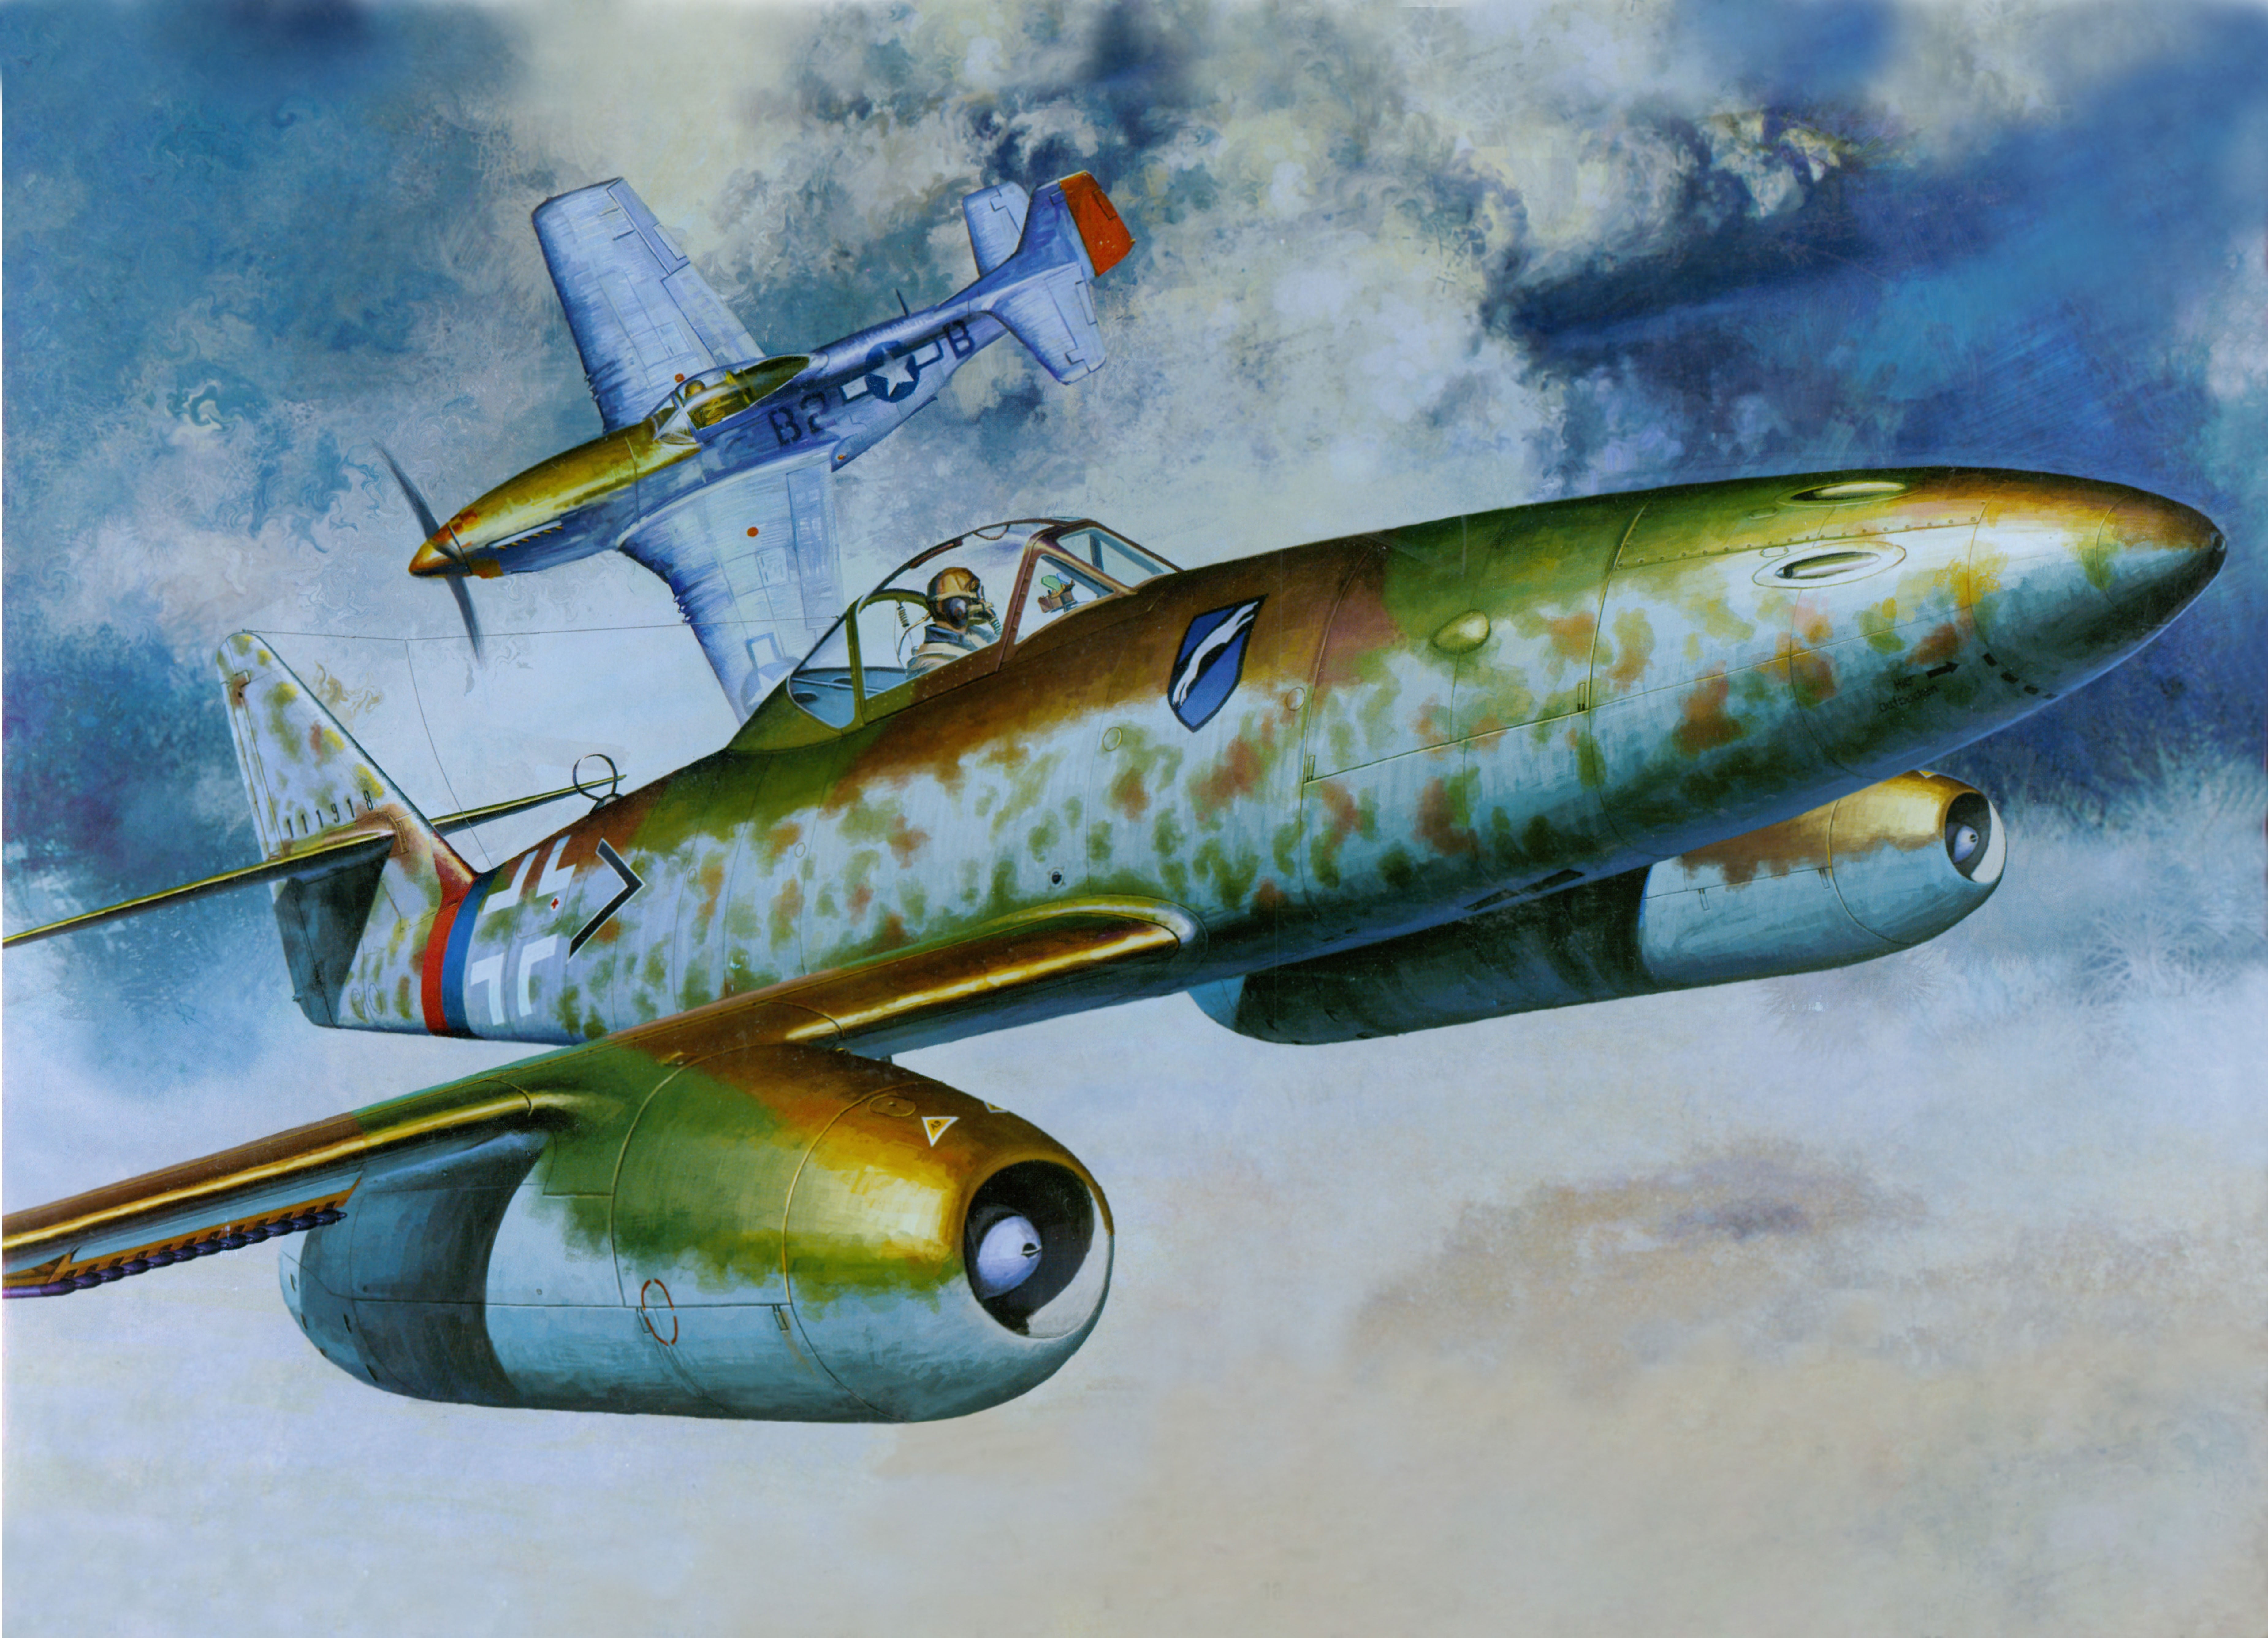 Green And White Plane Painting Messerschmidt Artwork Military Images, Photos, Reviews